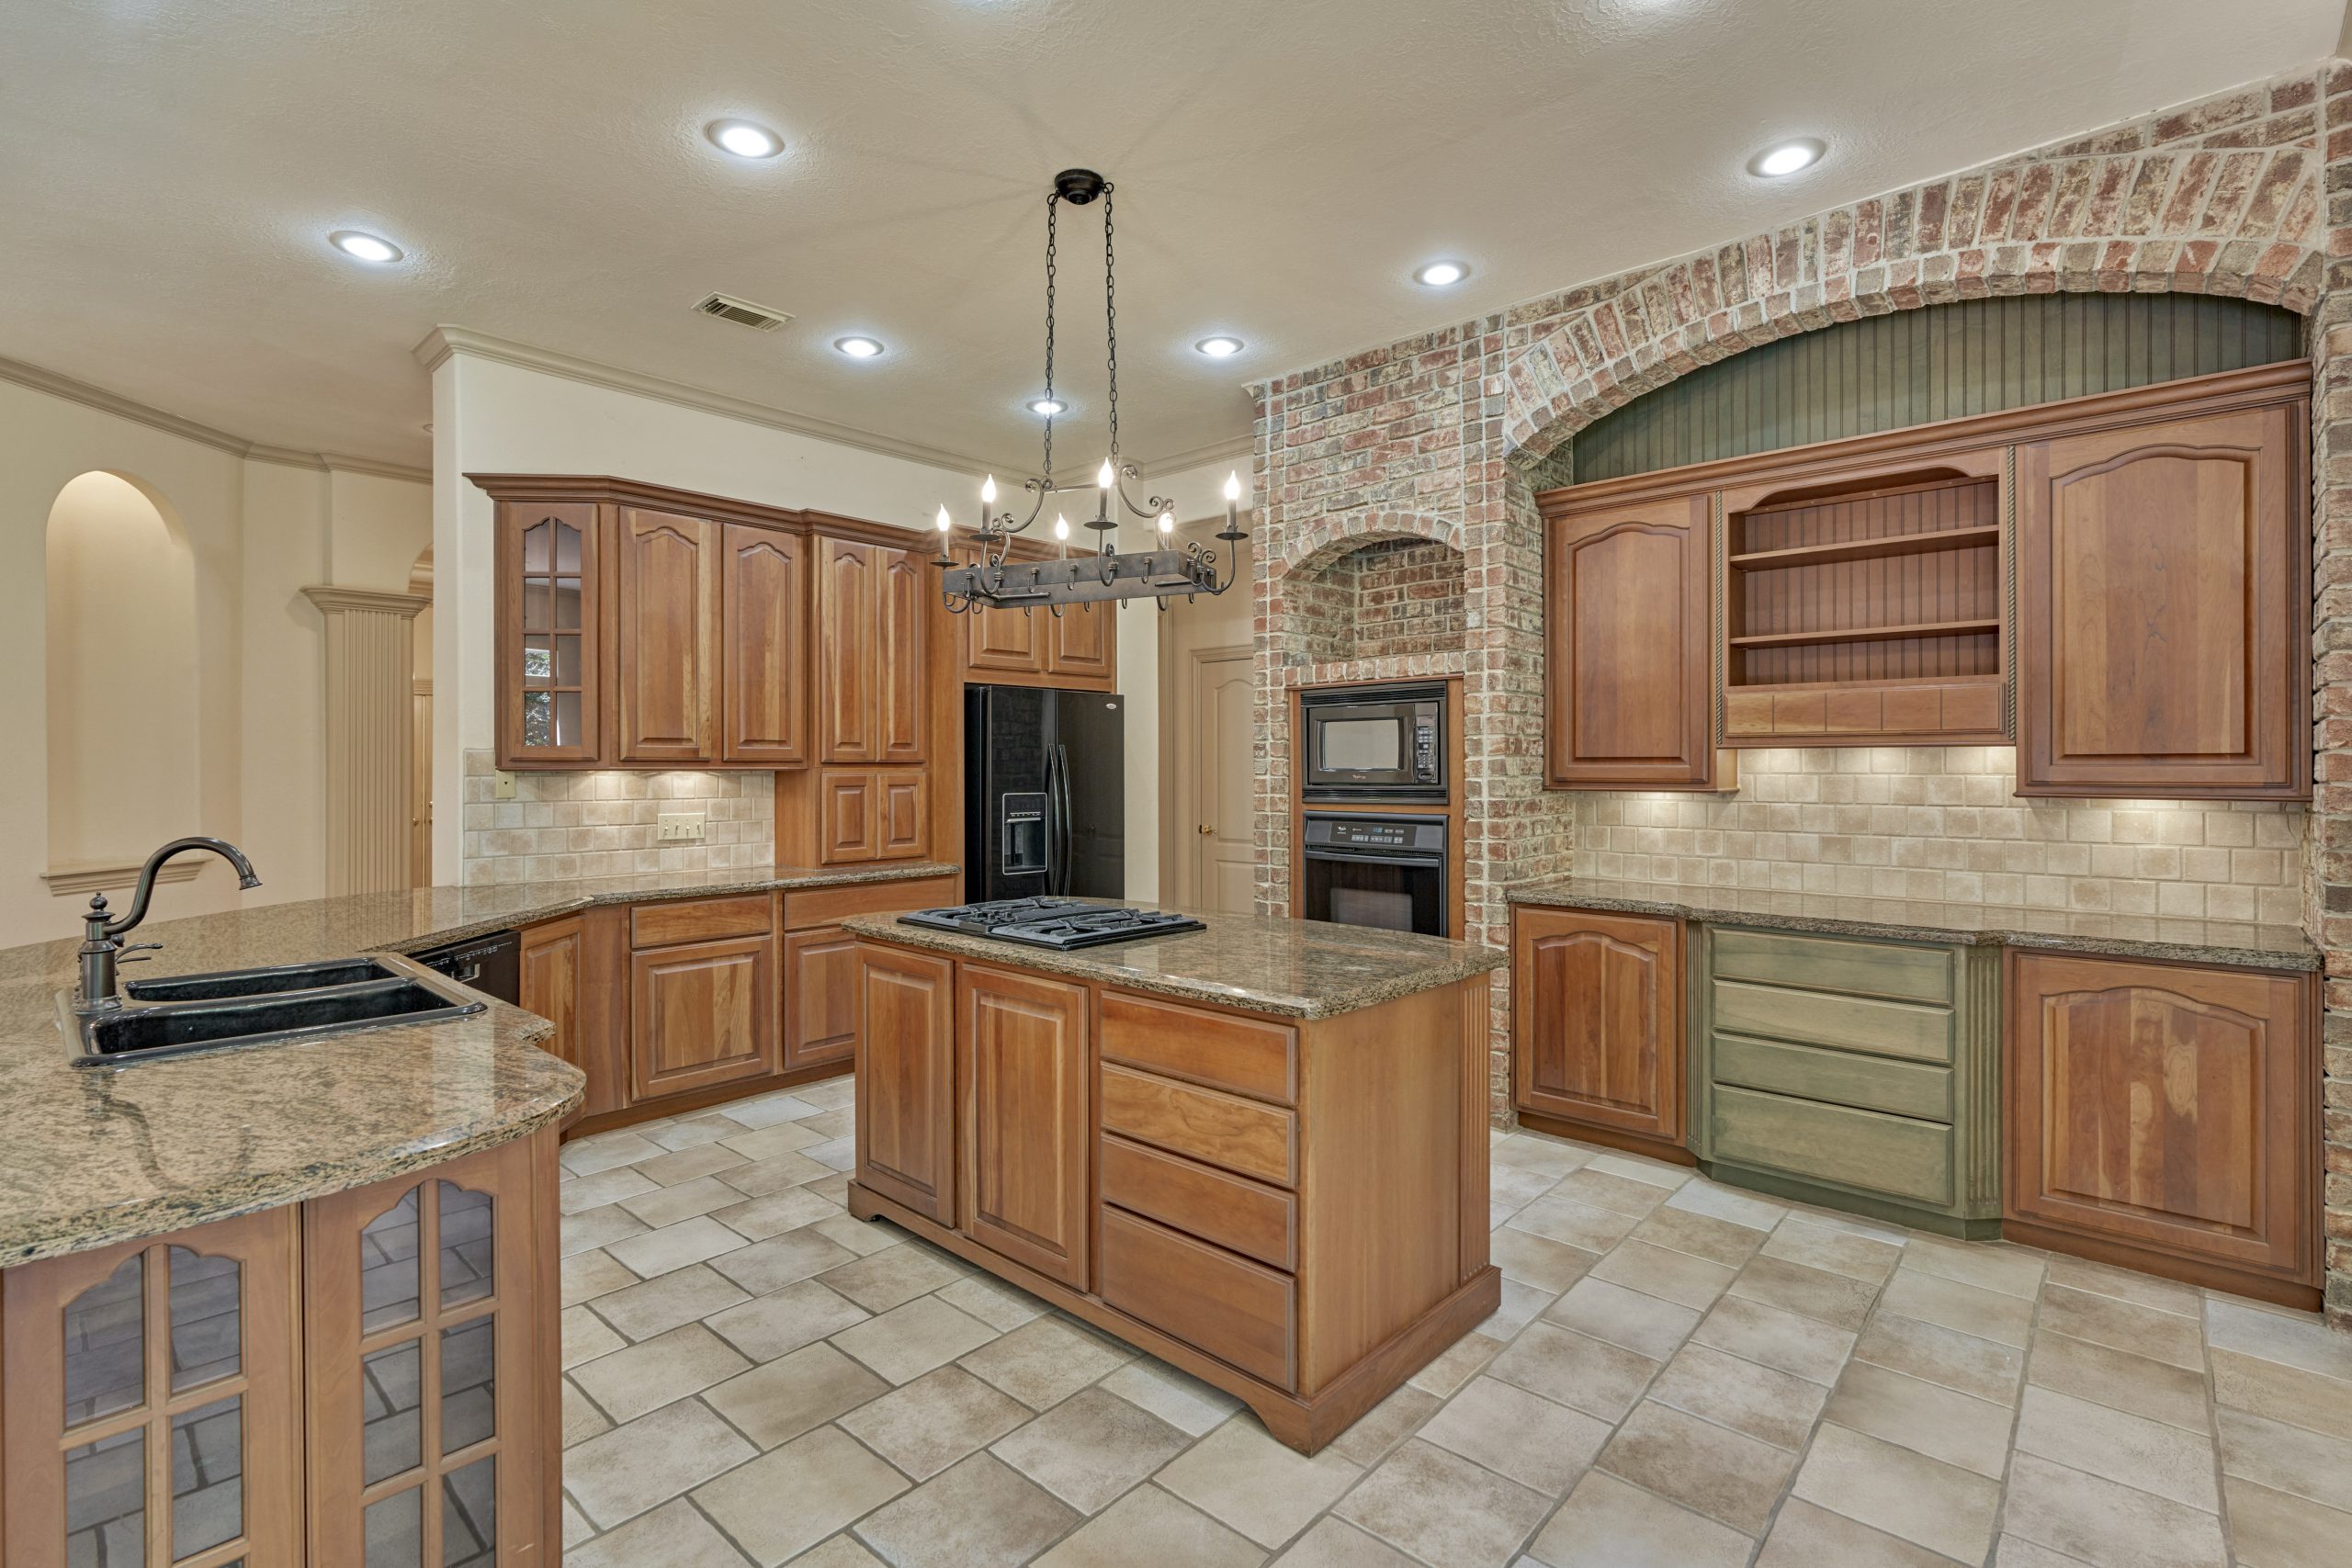 kitchen of a residential property before remodeling